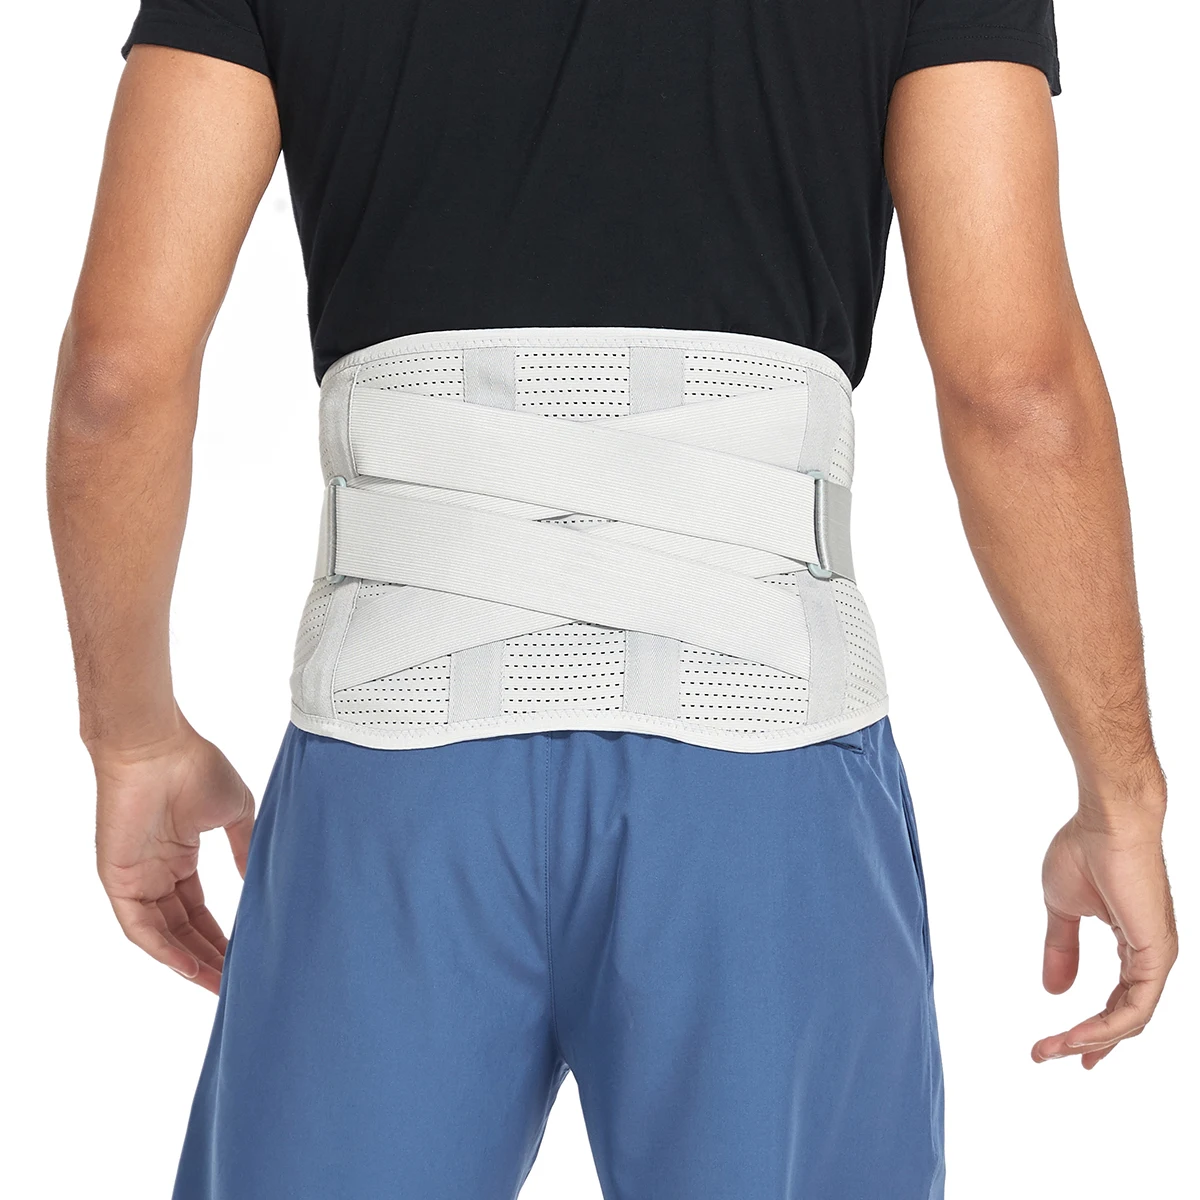 Back Brace for Men Breathable Waist Shapers Lumbar Lower Back Support Belt Herniated Disc Back Pain Relief Heavy Lifting far infrared heat therapy waist massager back belt herniated disc scoliosis back pain relief spine lumbar brace support massager